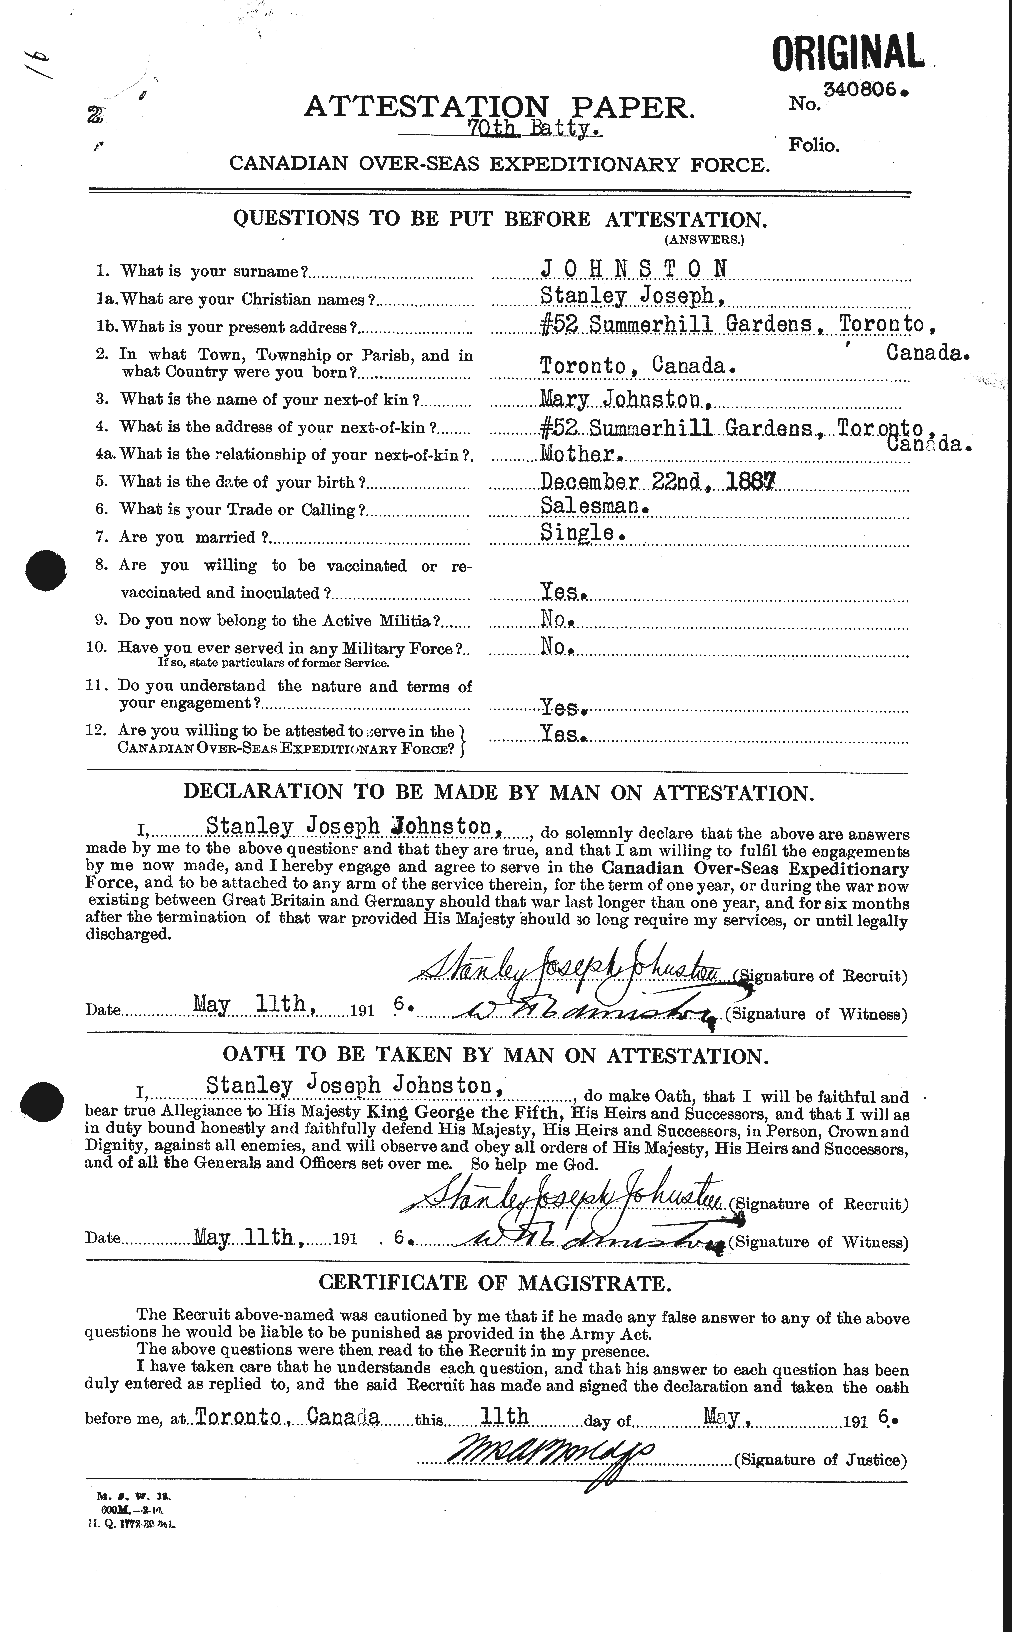 Personnel Records of the First World War - CEF 427105a